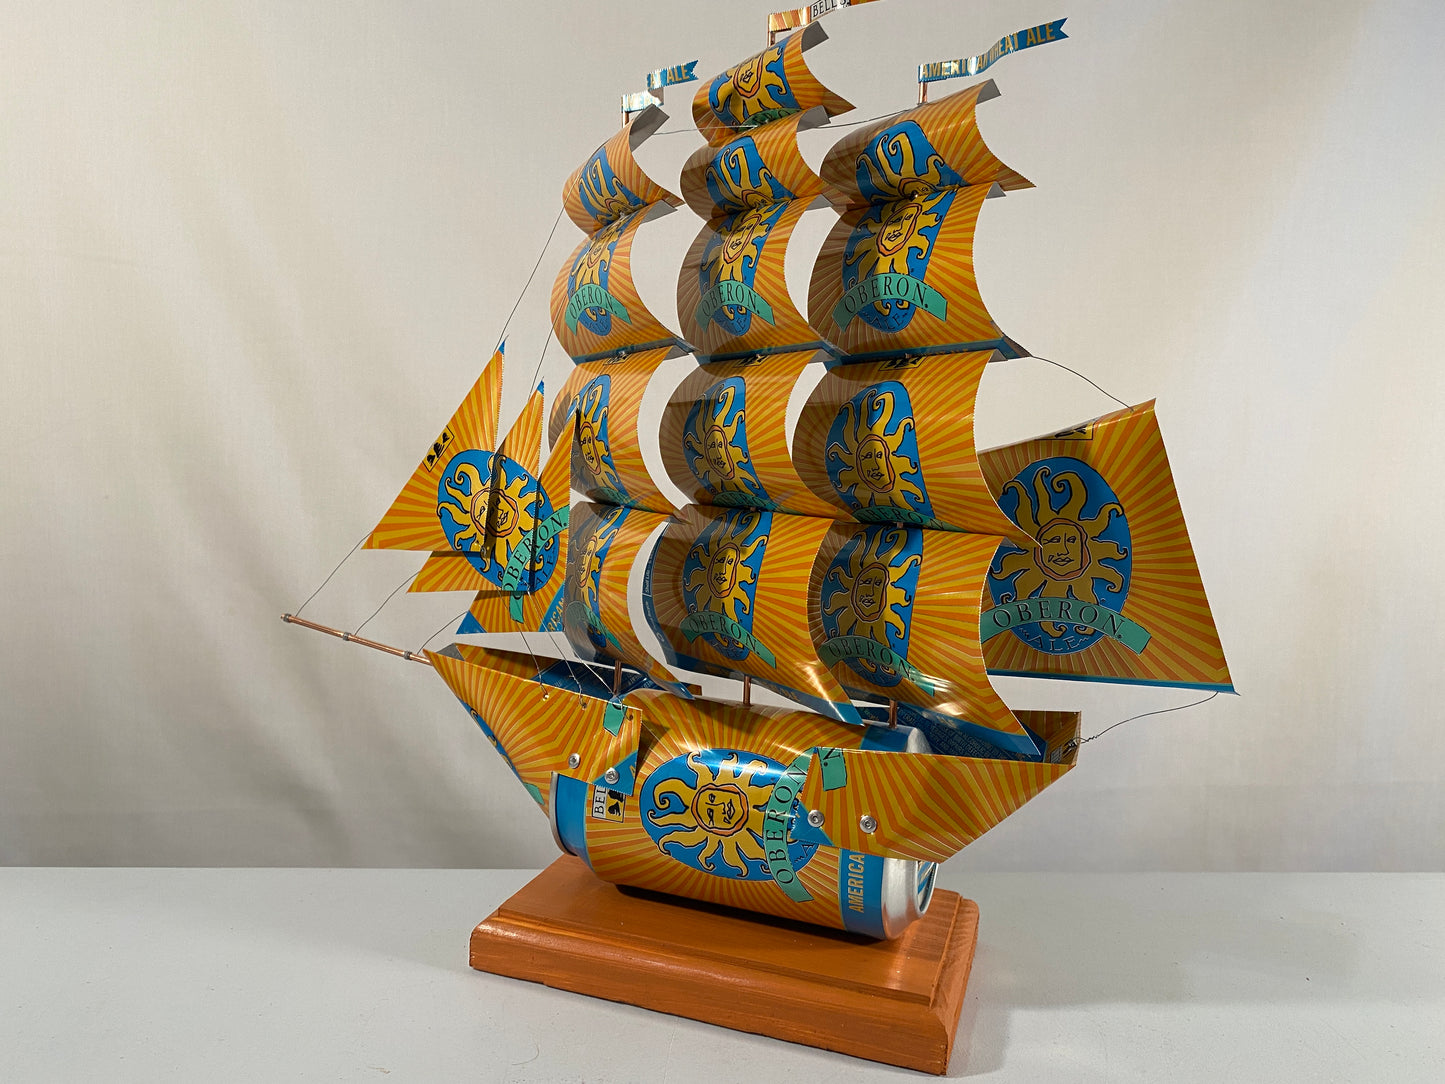 Bell's Oberon Ale Beer Can Ship